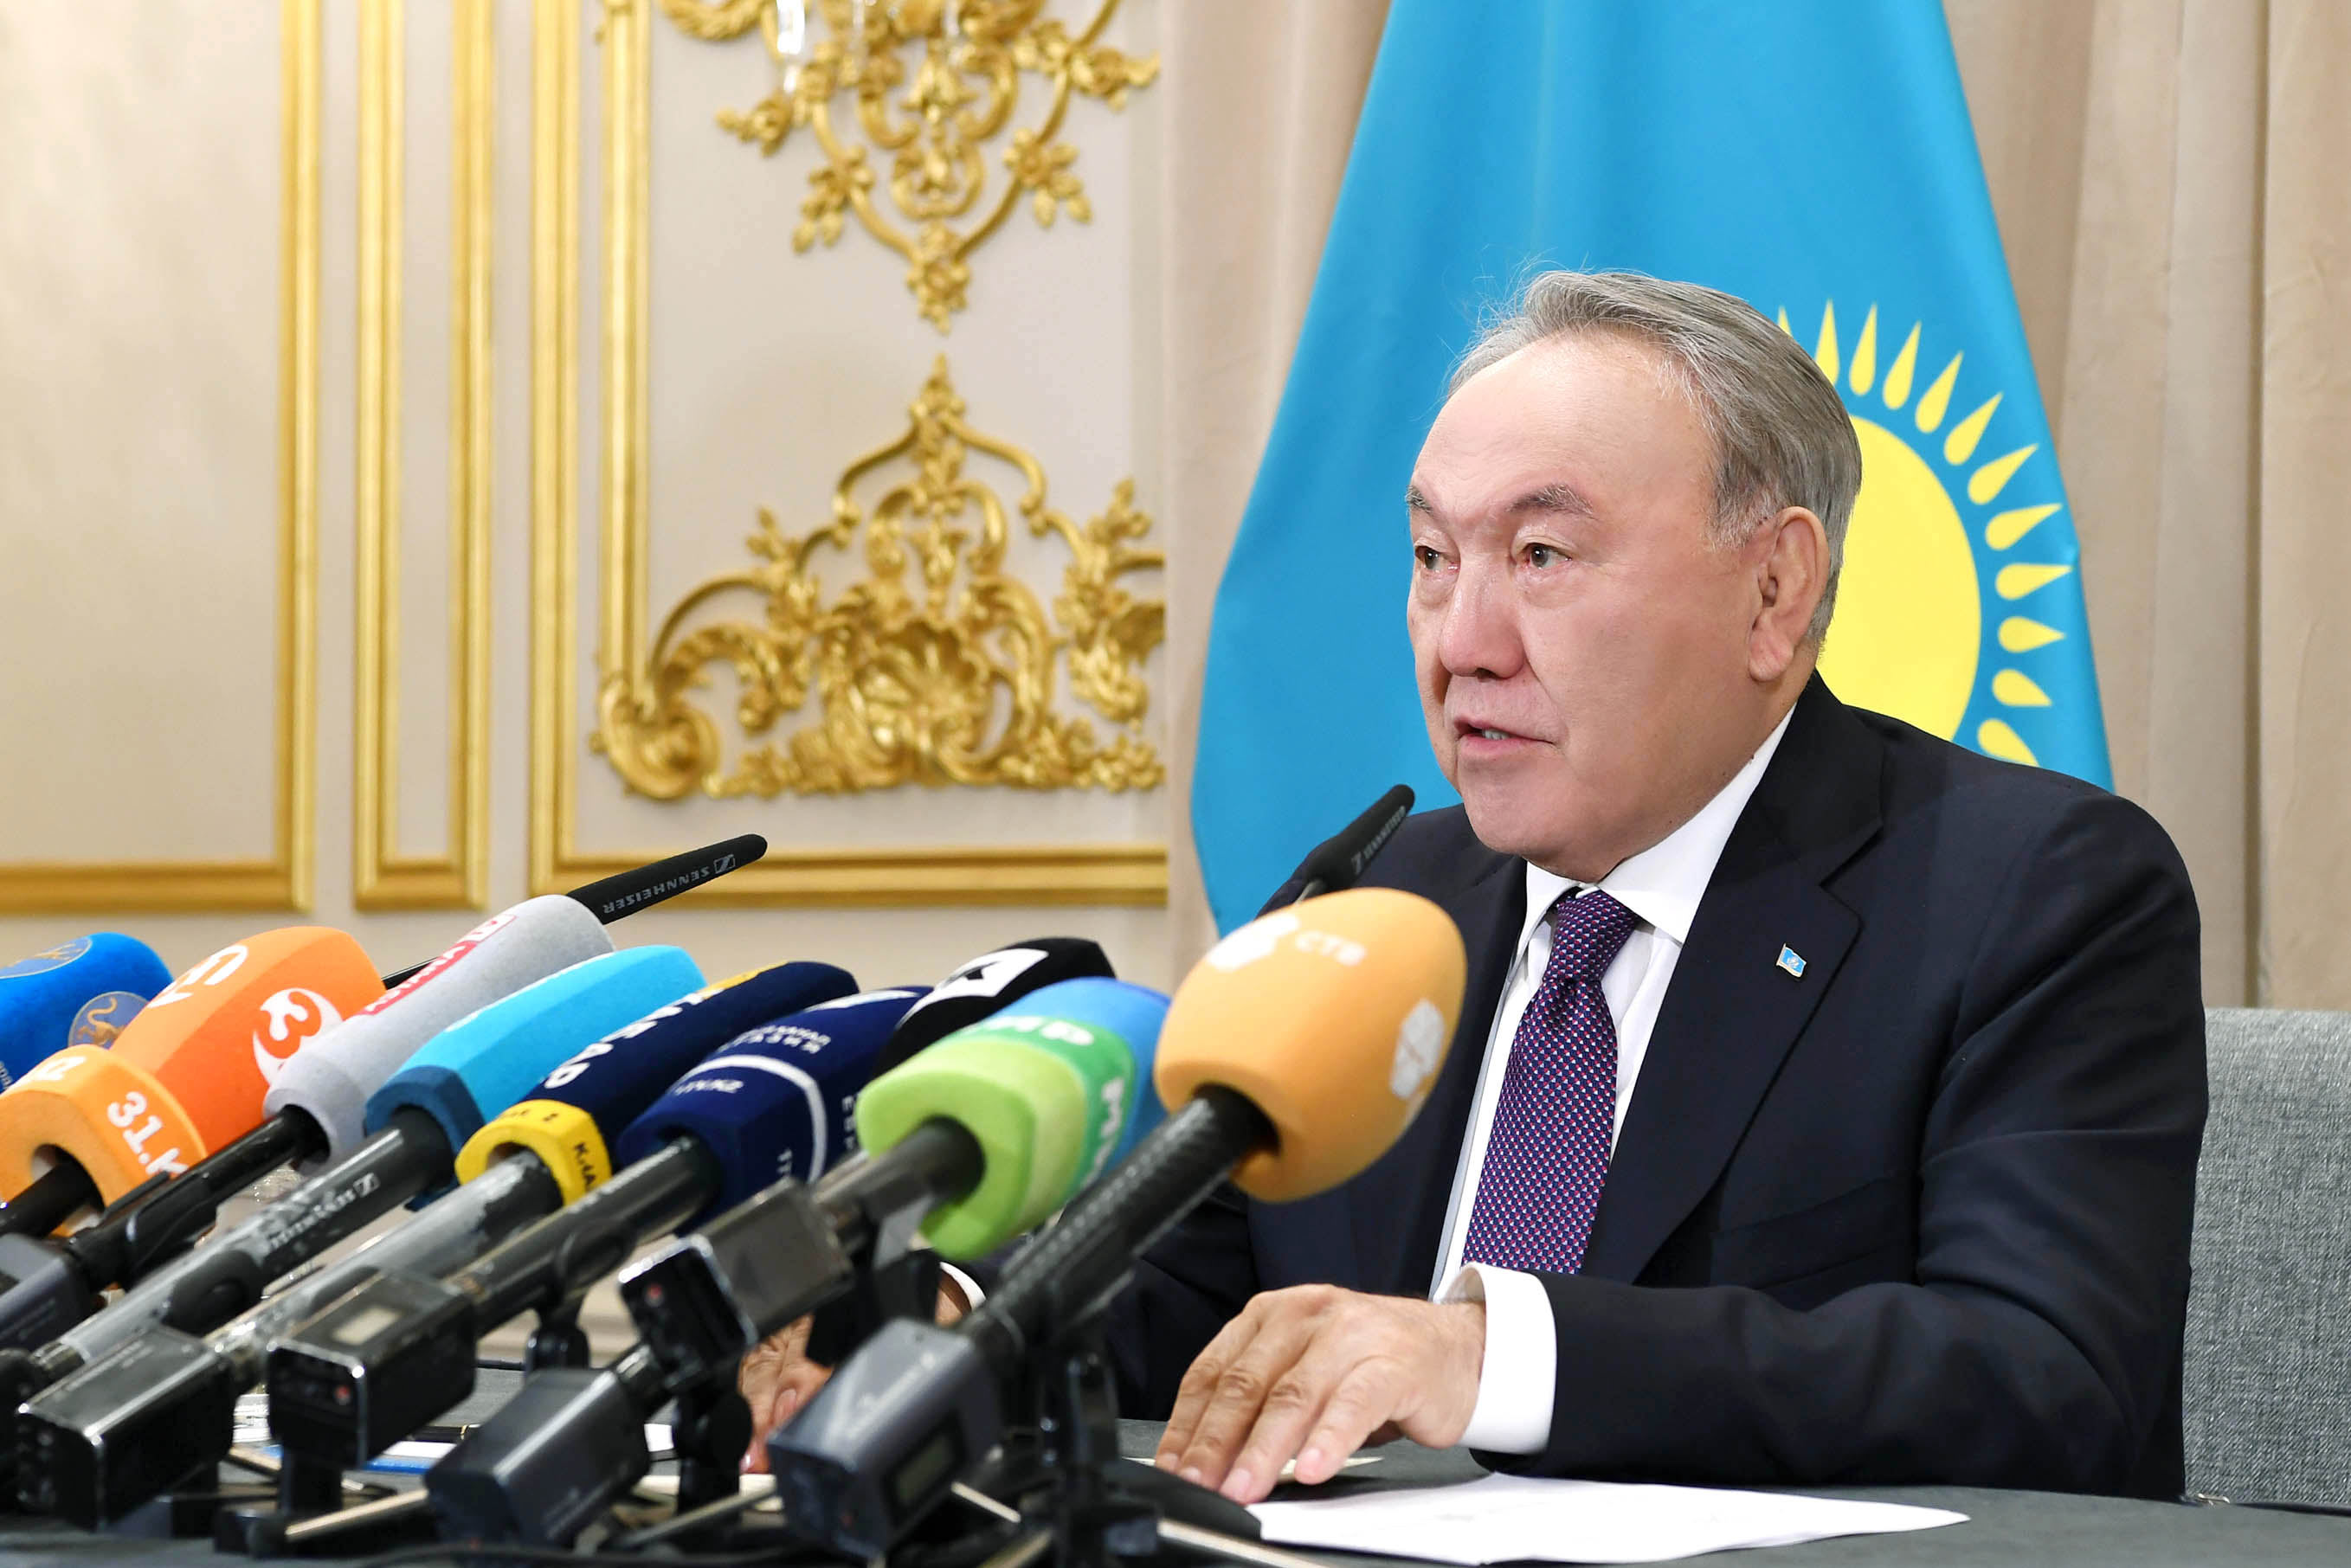 Kazakh President held a press conference following his official visit to the USA